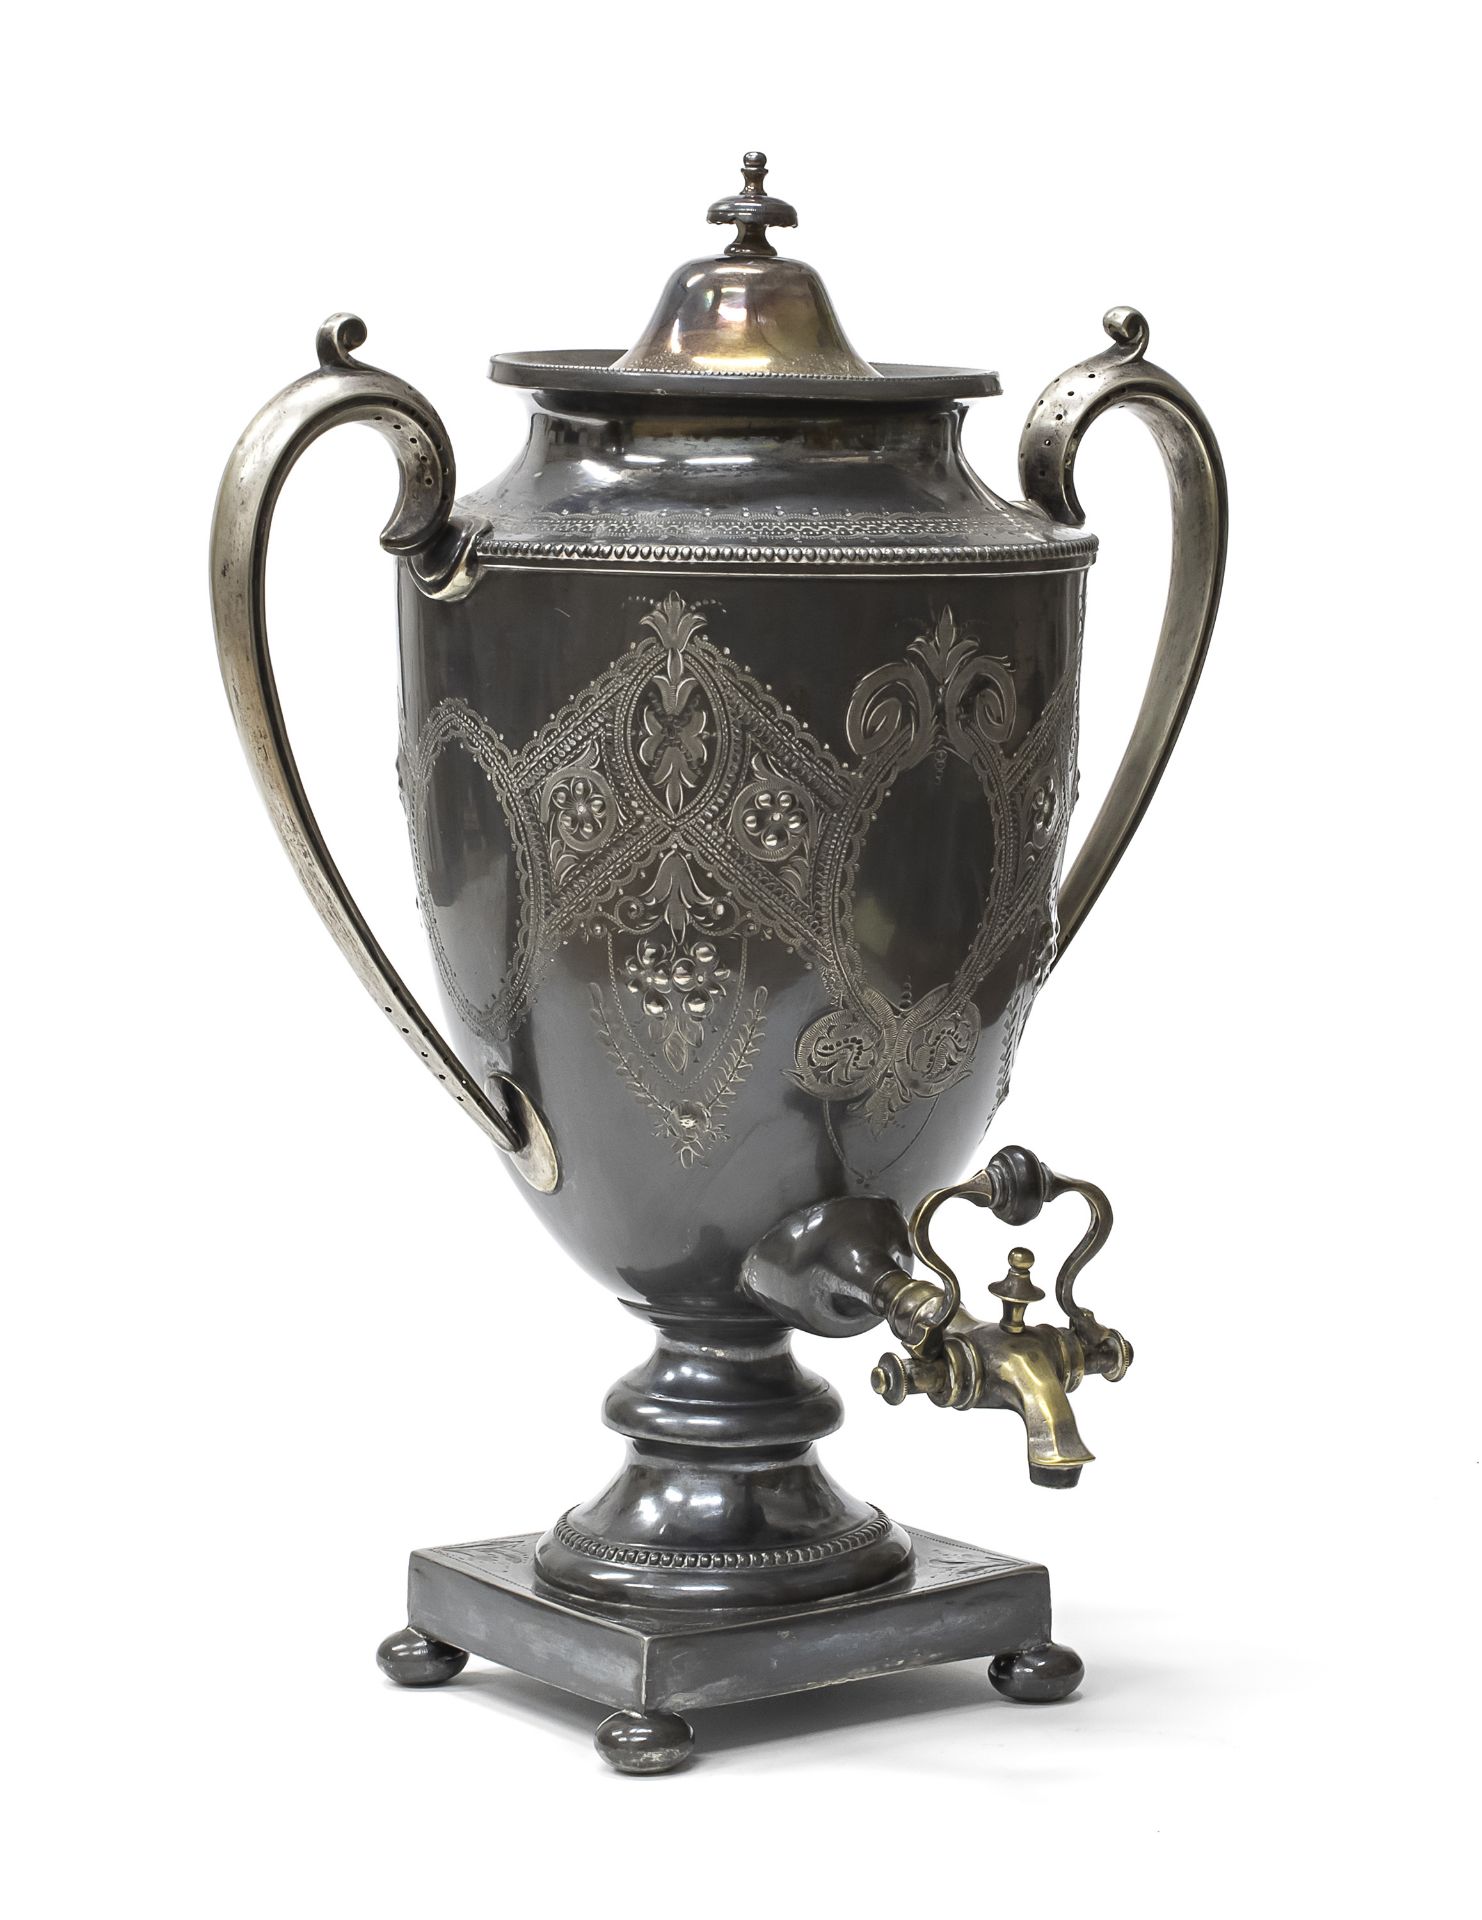 PEWTER SAMOVAR ENGLAND END OF THE 19TH CENTURY